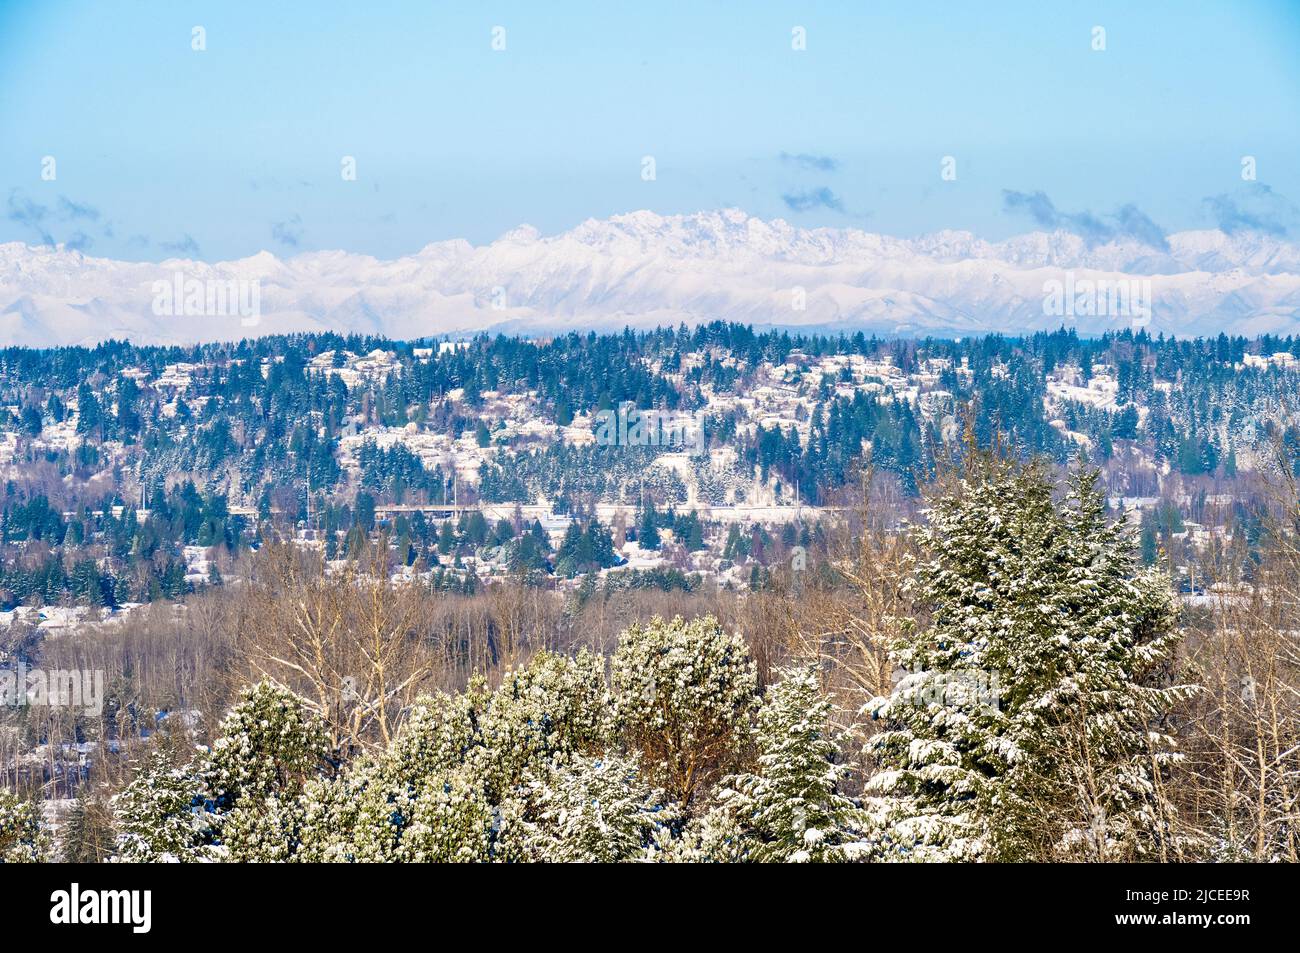 snow covered Olympic mountain range in the Washington state on a winter day with the Puyallup valley befow Stock Photo